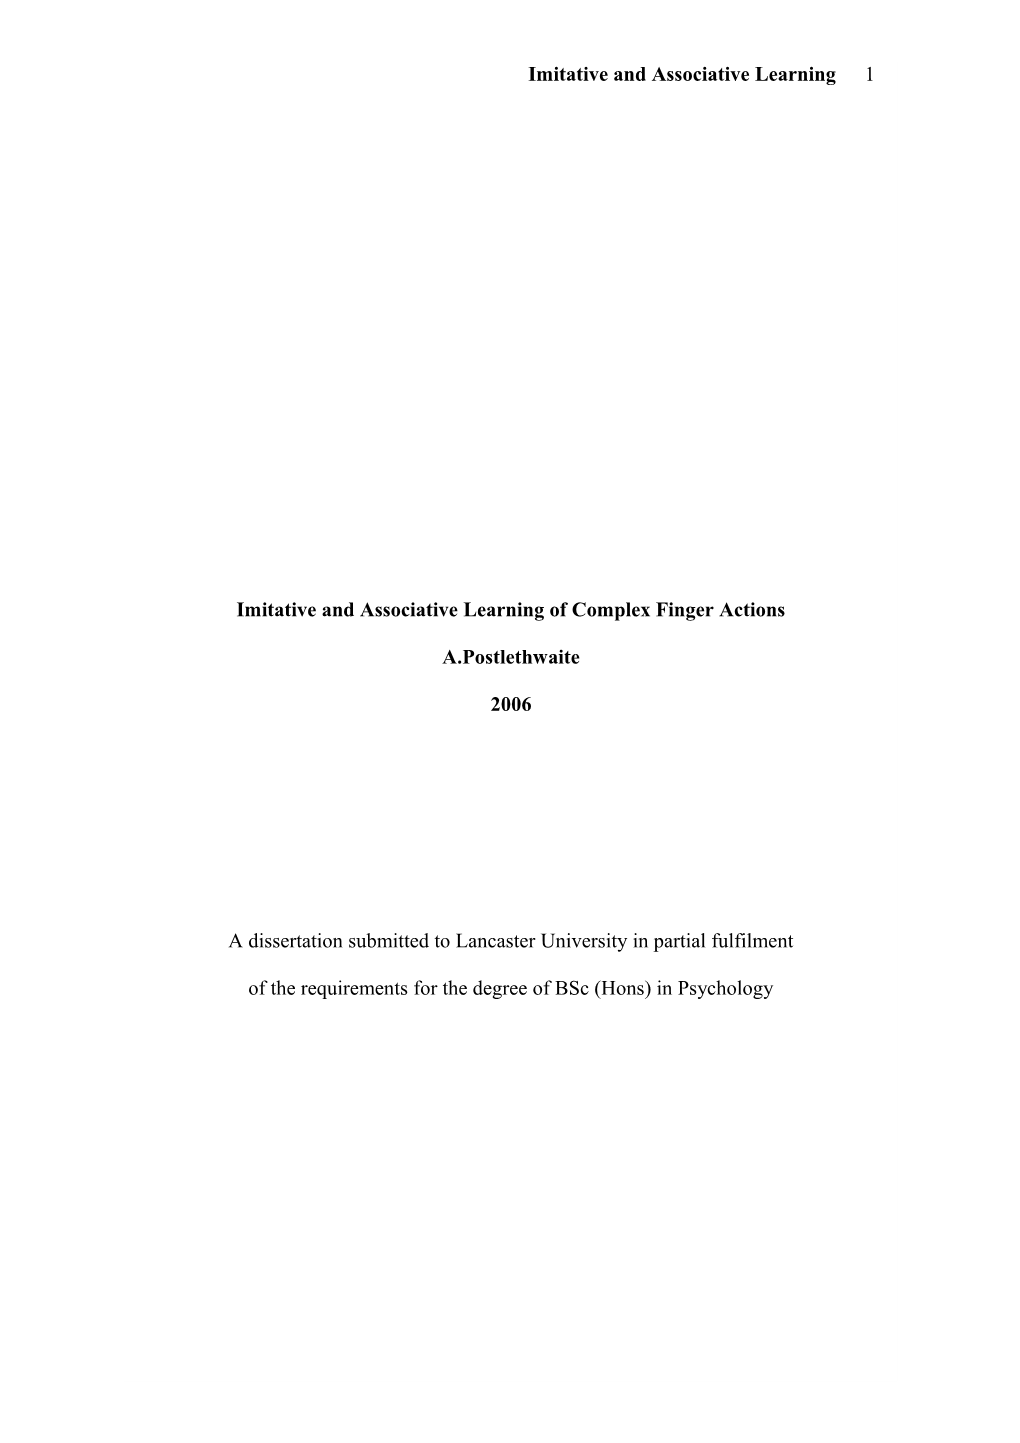 Imitative and Associative Learning of Complex Finger Actions